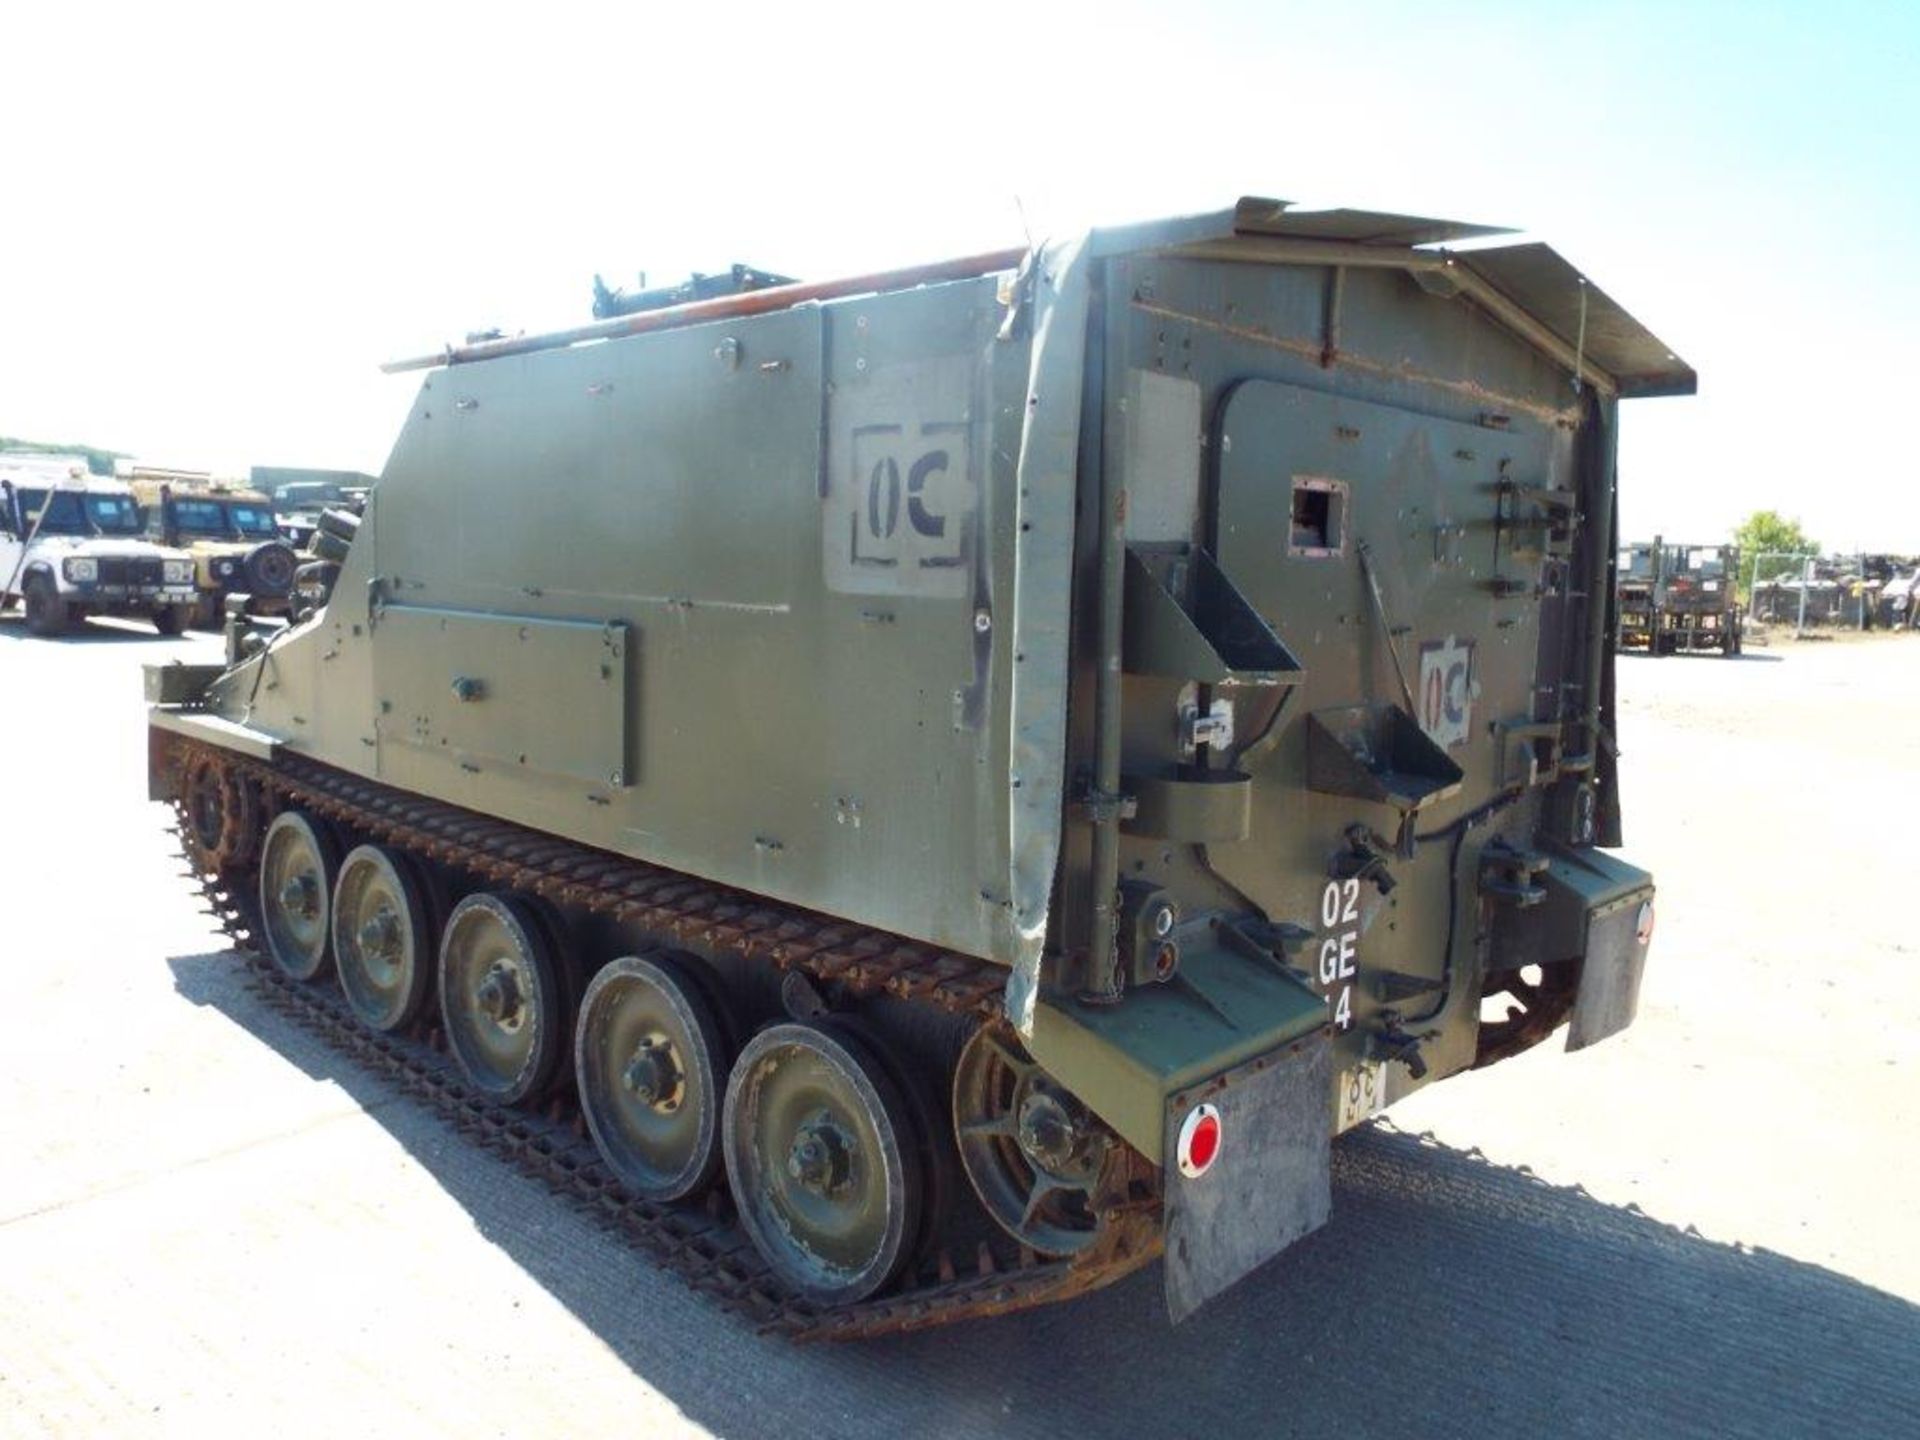 CVRT (Combat Vehicle Reconnaissance Tracked) FV105 Sultan Armoured Personnel Carrier - Image 5 of 28